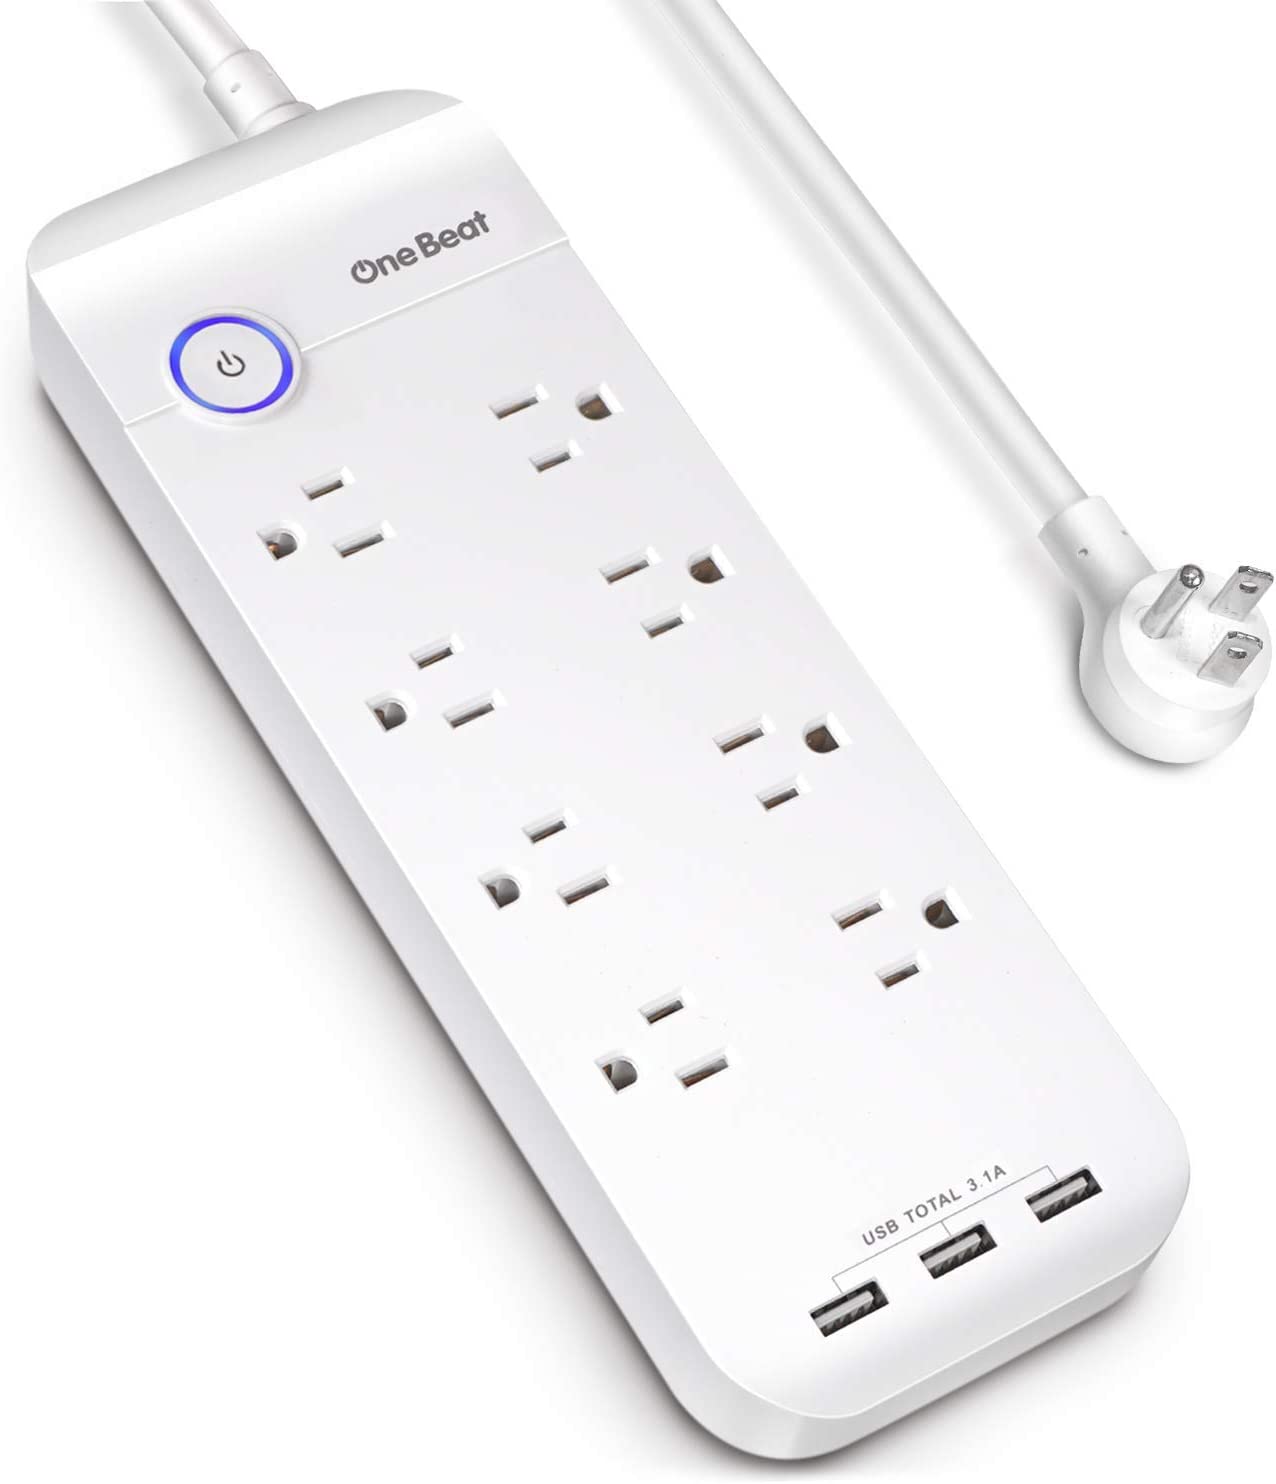 One Beat 1800J 8-Outlet & 3-USB Surge Protector Power Strip (White) $13.80 + Free Shipping w/ Prime or Orders $25+